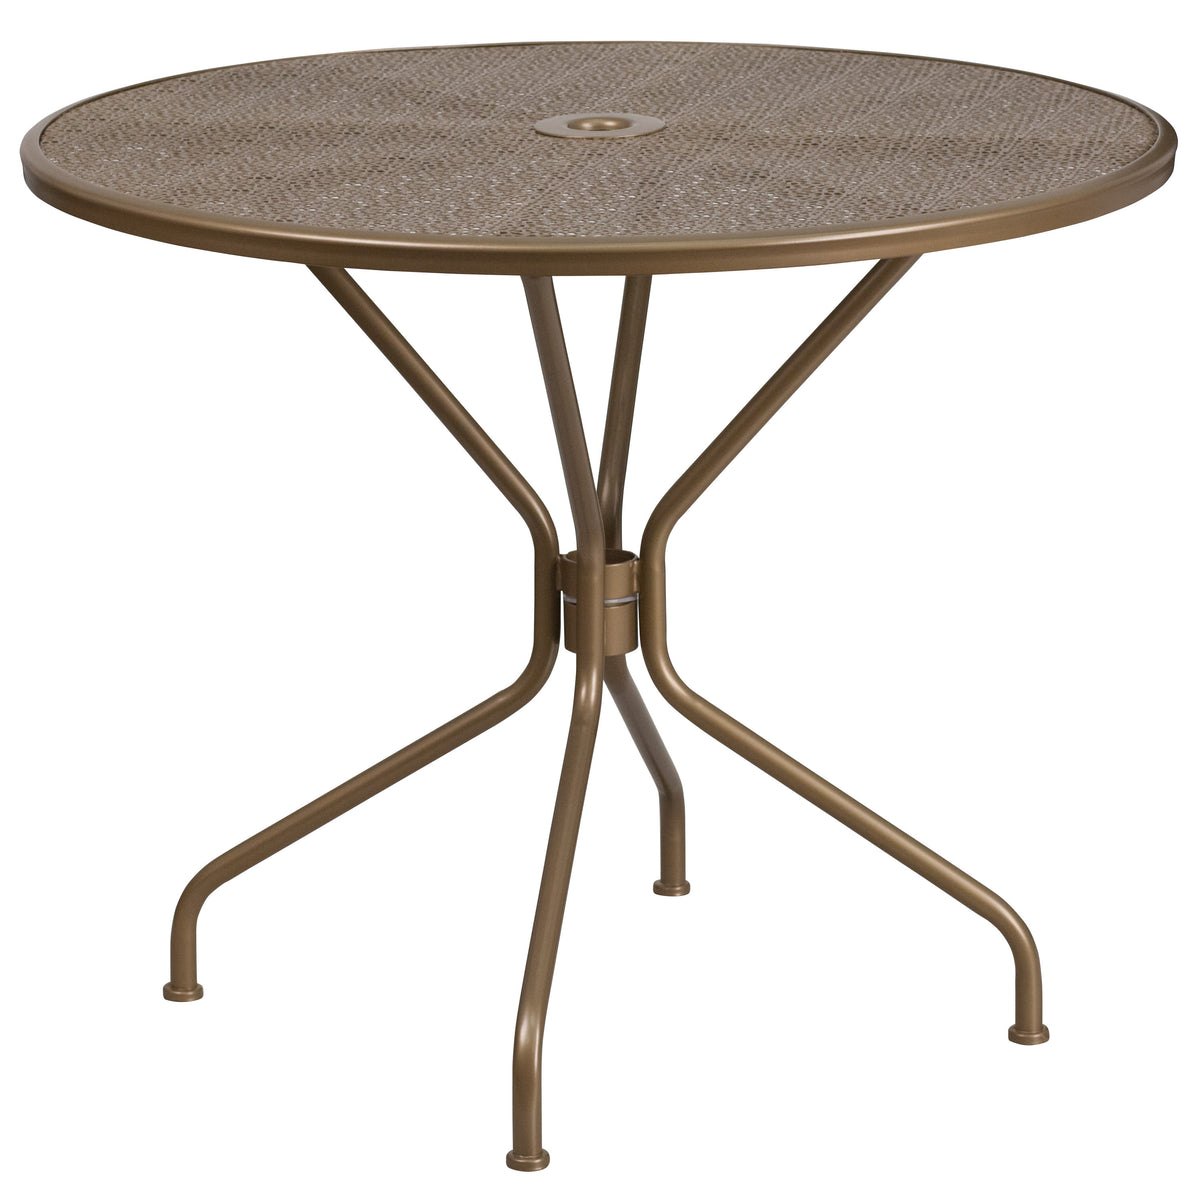 Gold |#| 35.25inch Round Gold Indoor-Outdoor Steel Patio Table Set with 4 Round Back Chairs